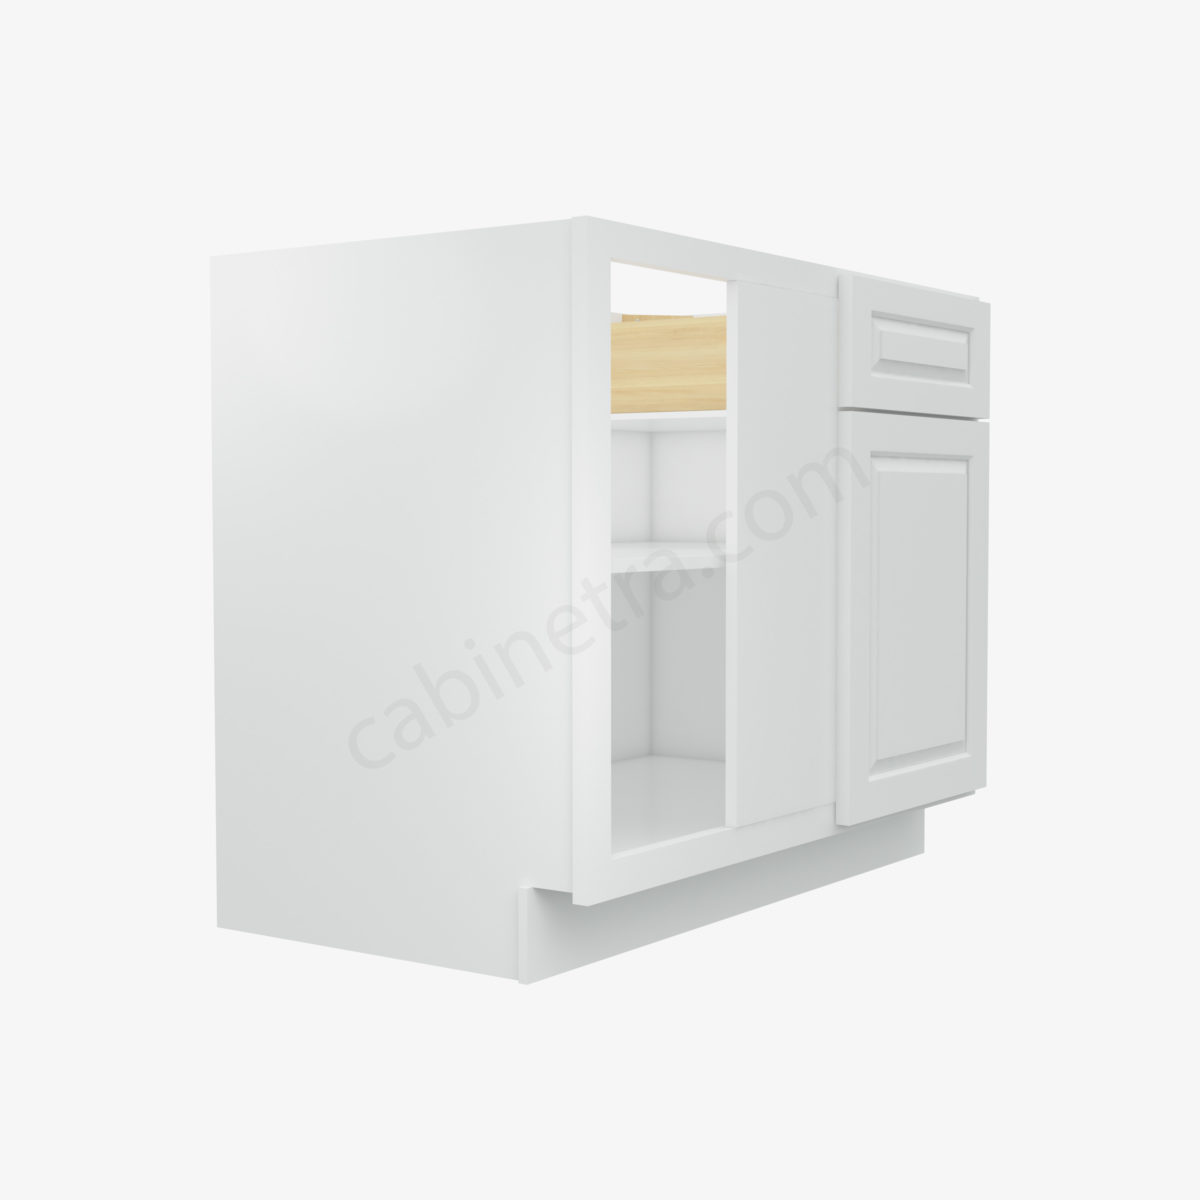 GW BBLC42 45 39W 4  Forevermark Gramercy White Cabinetra scaled